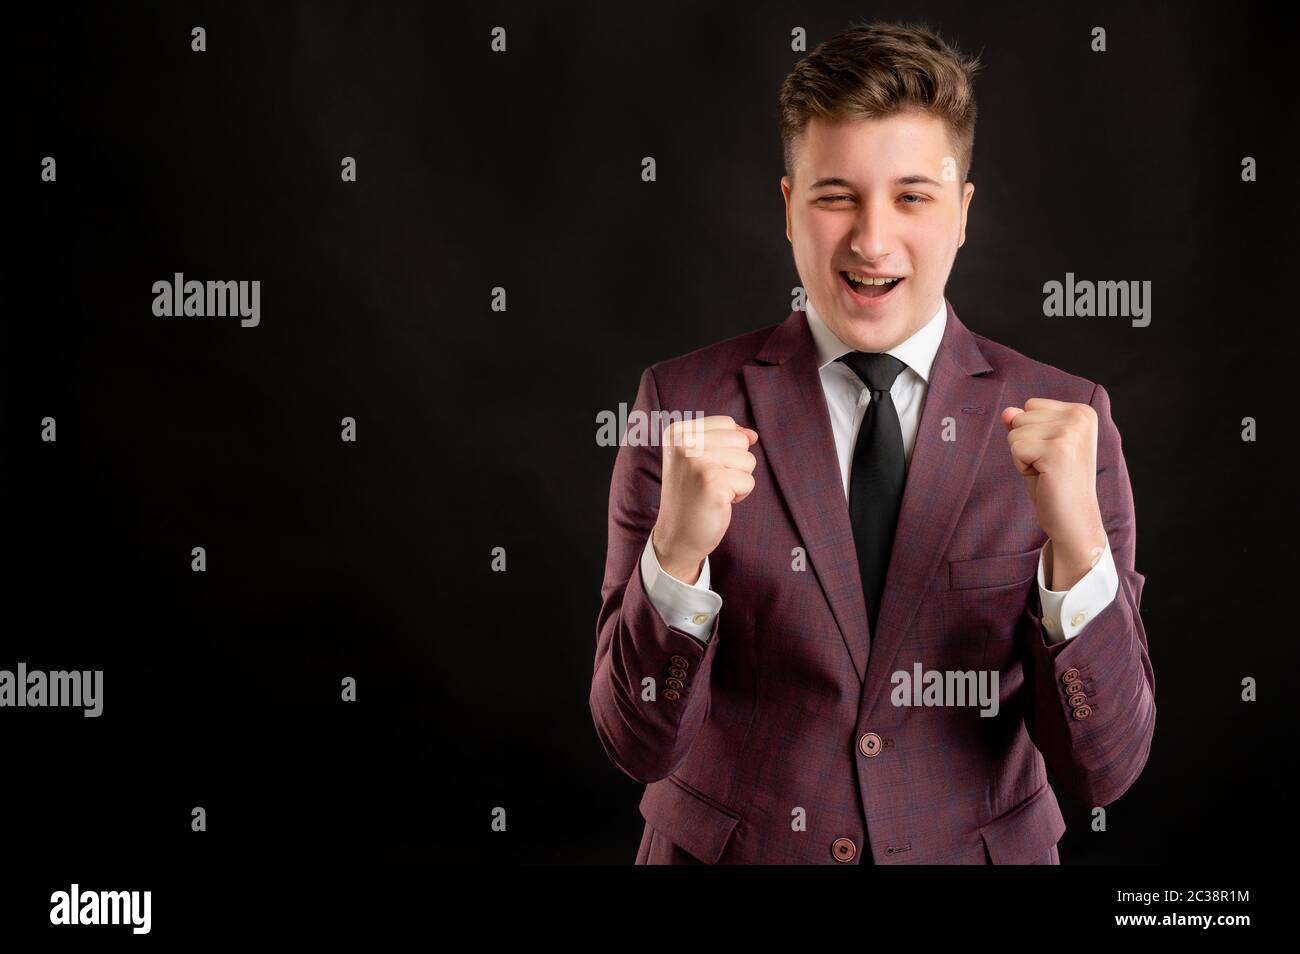 Law student with blond hair dressed in burgundy jacket, white shirt and black tie raised fists up exclaiming with joy and excitement posing on isolate Stock Photo